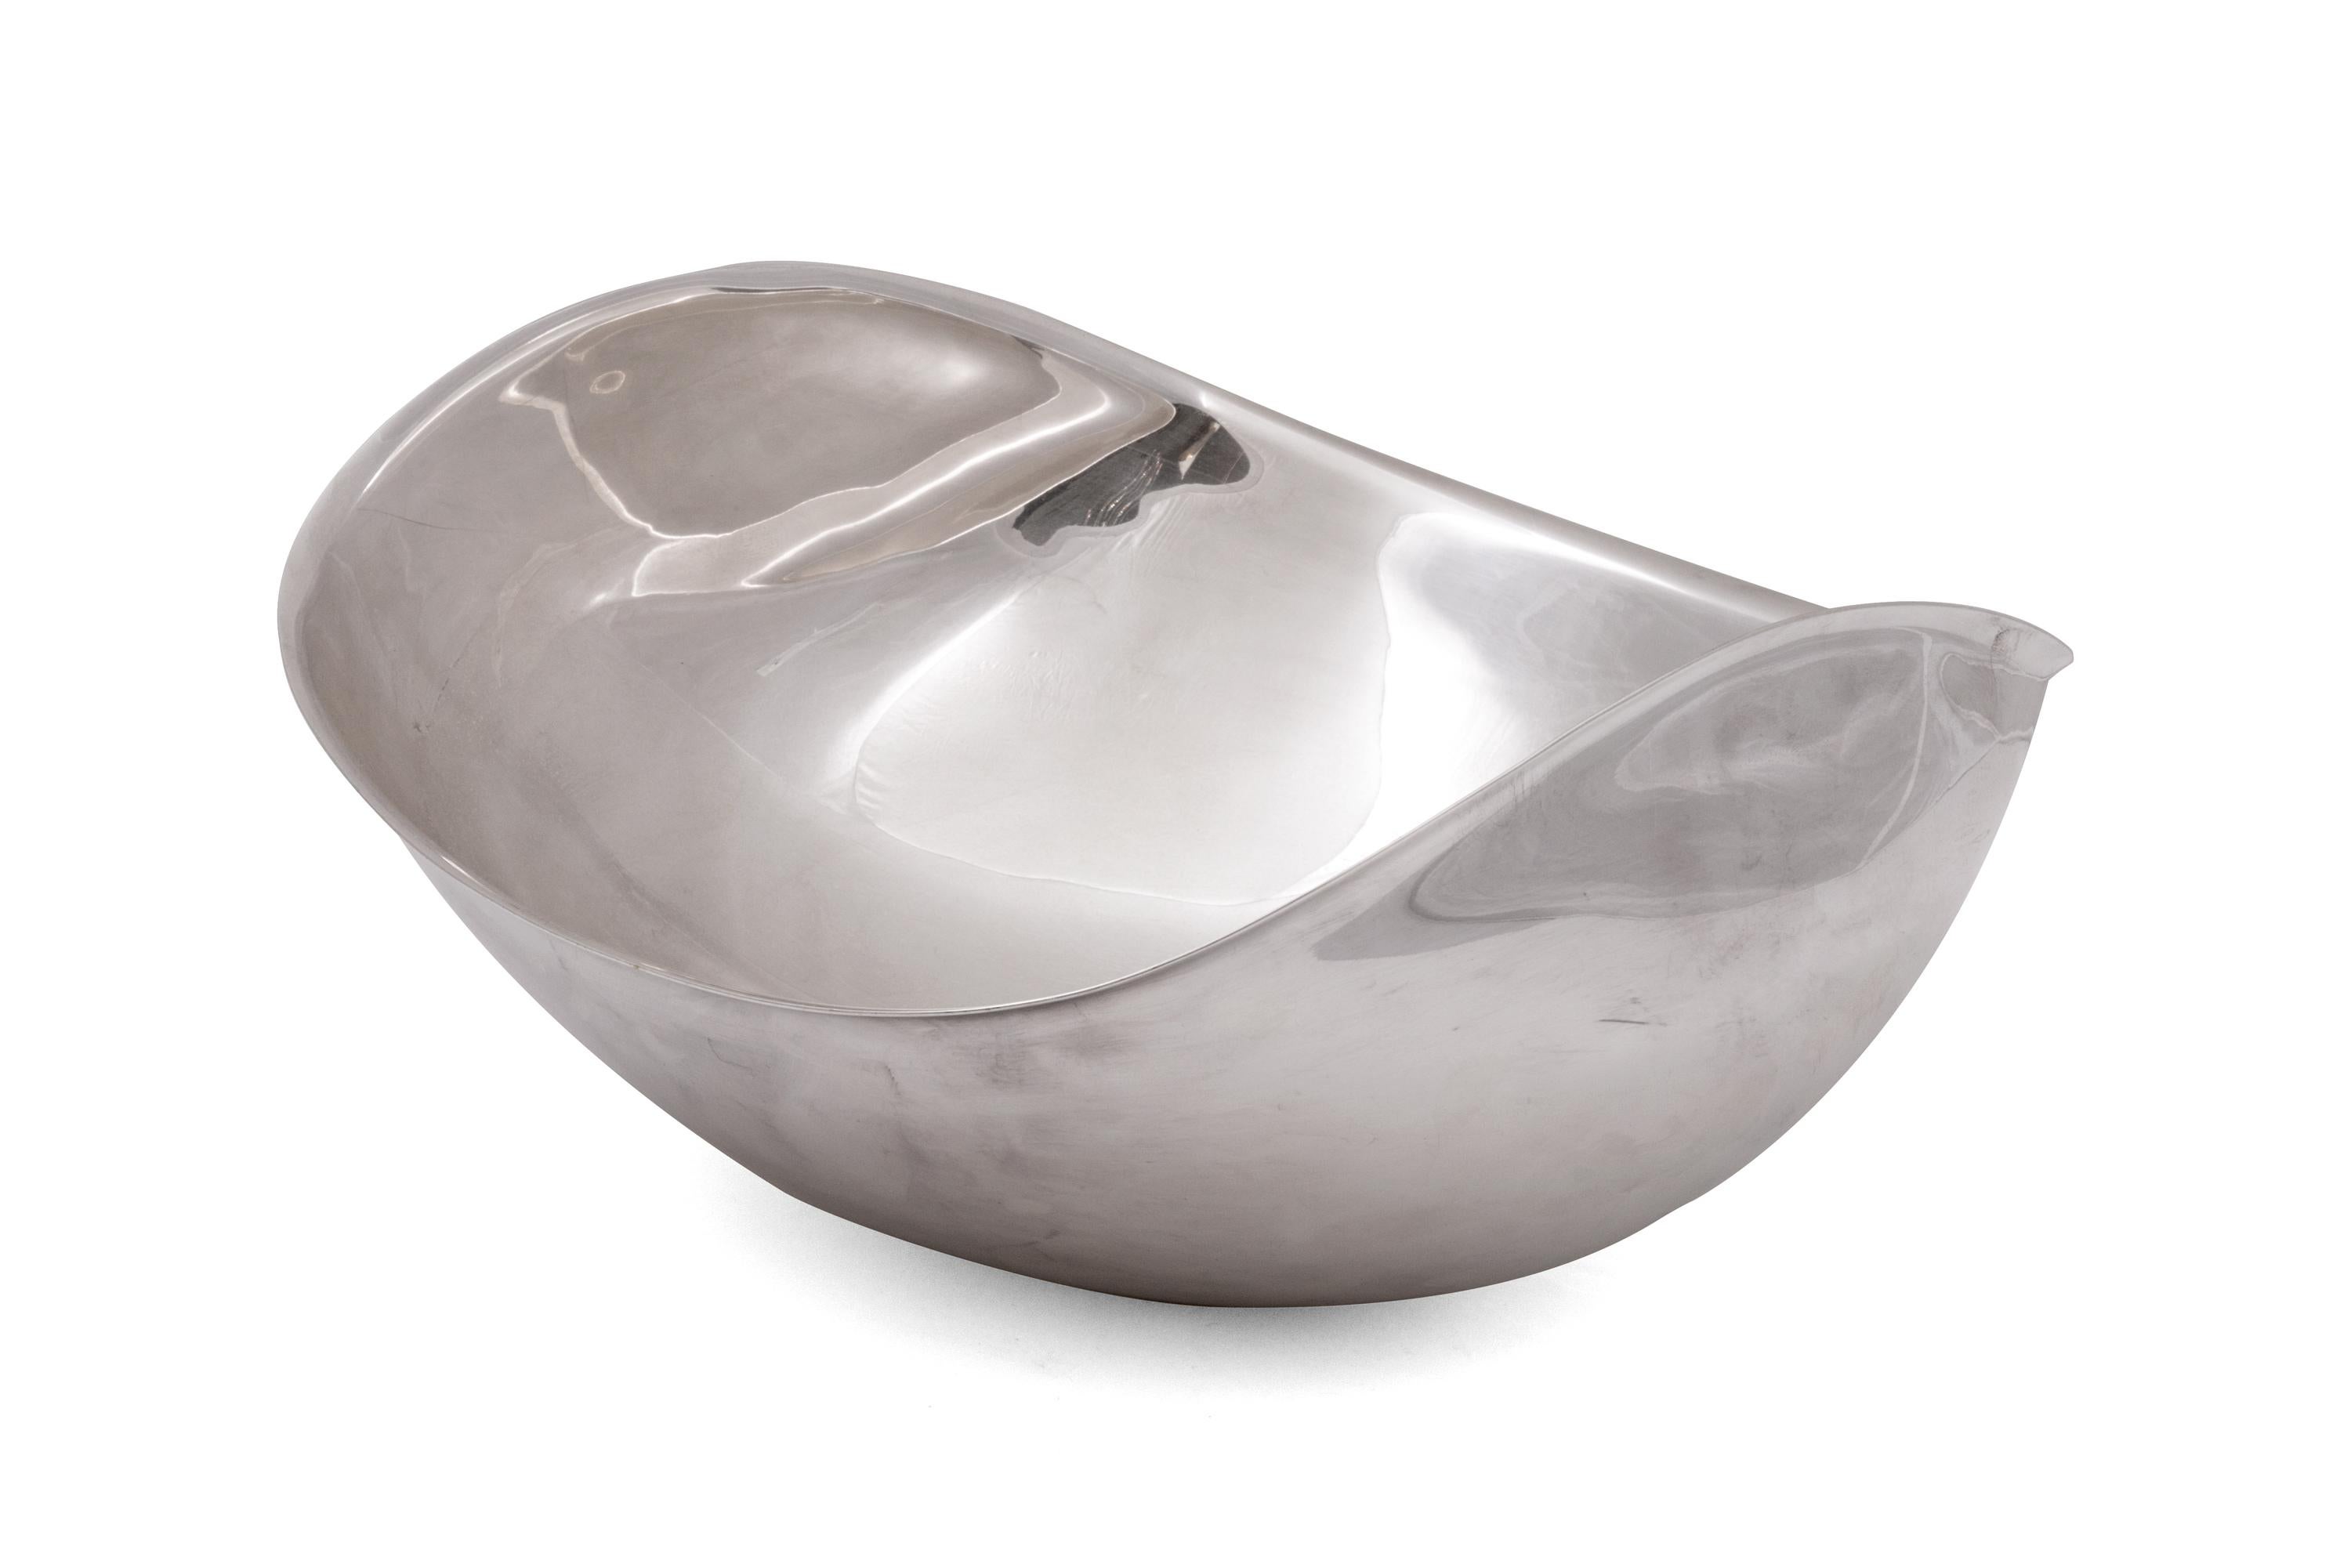 As with all of Sabattini's work this bowl possesses a modernist elegance. It also is an impressive size which makes it an ideal centrepiece.